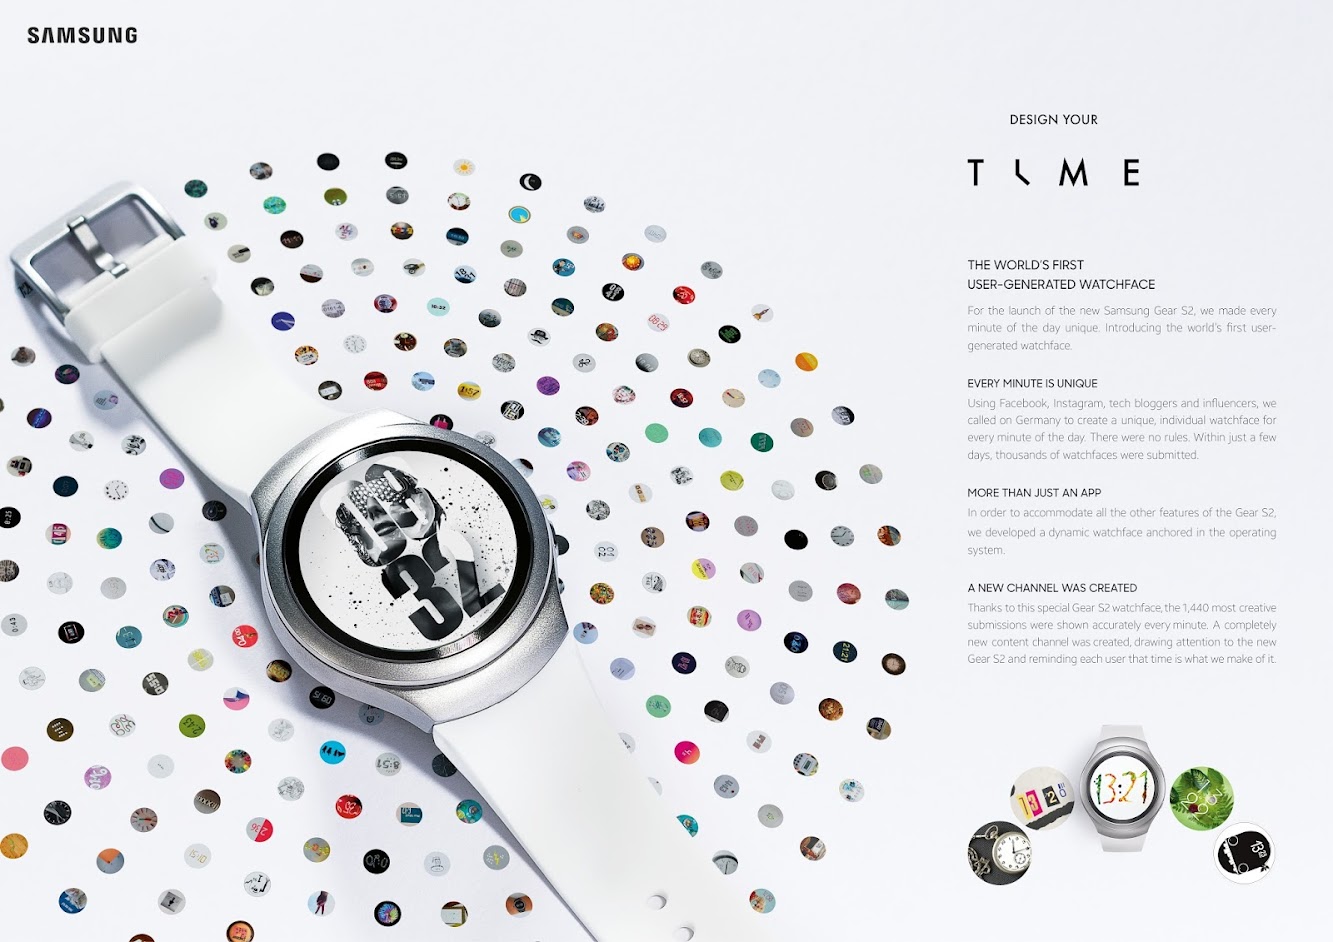 Samsung- Design Your Time